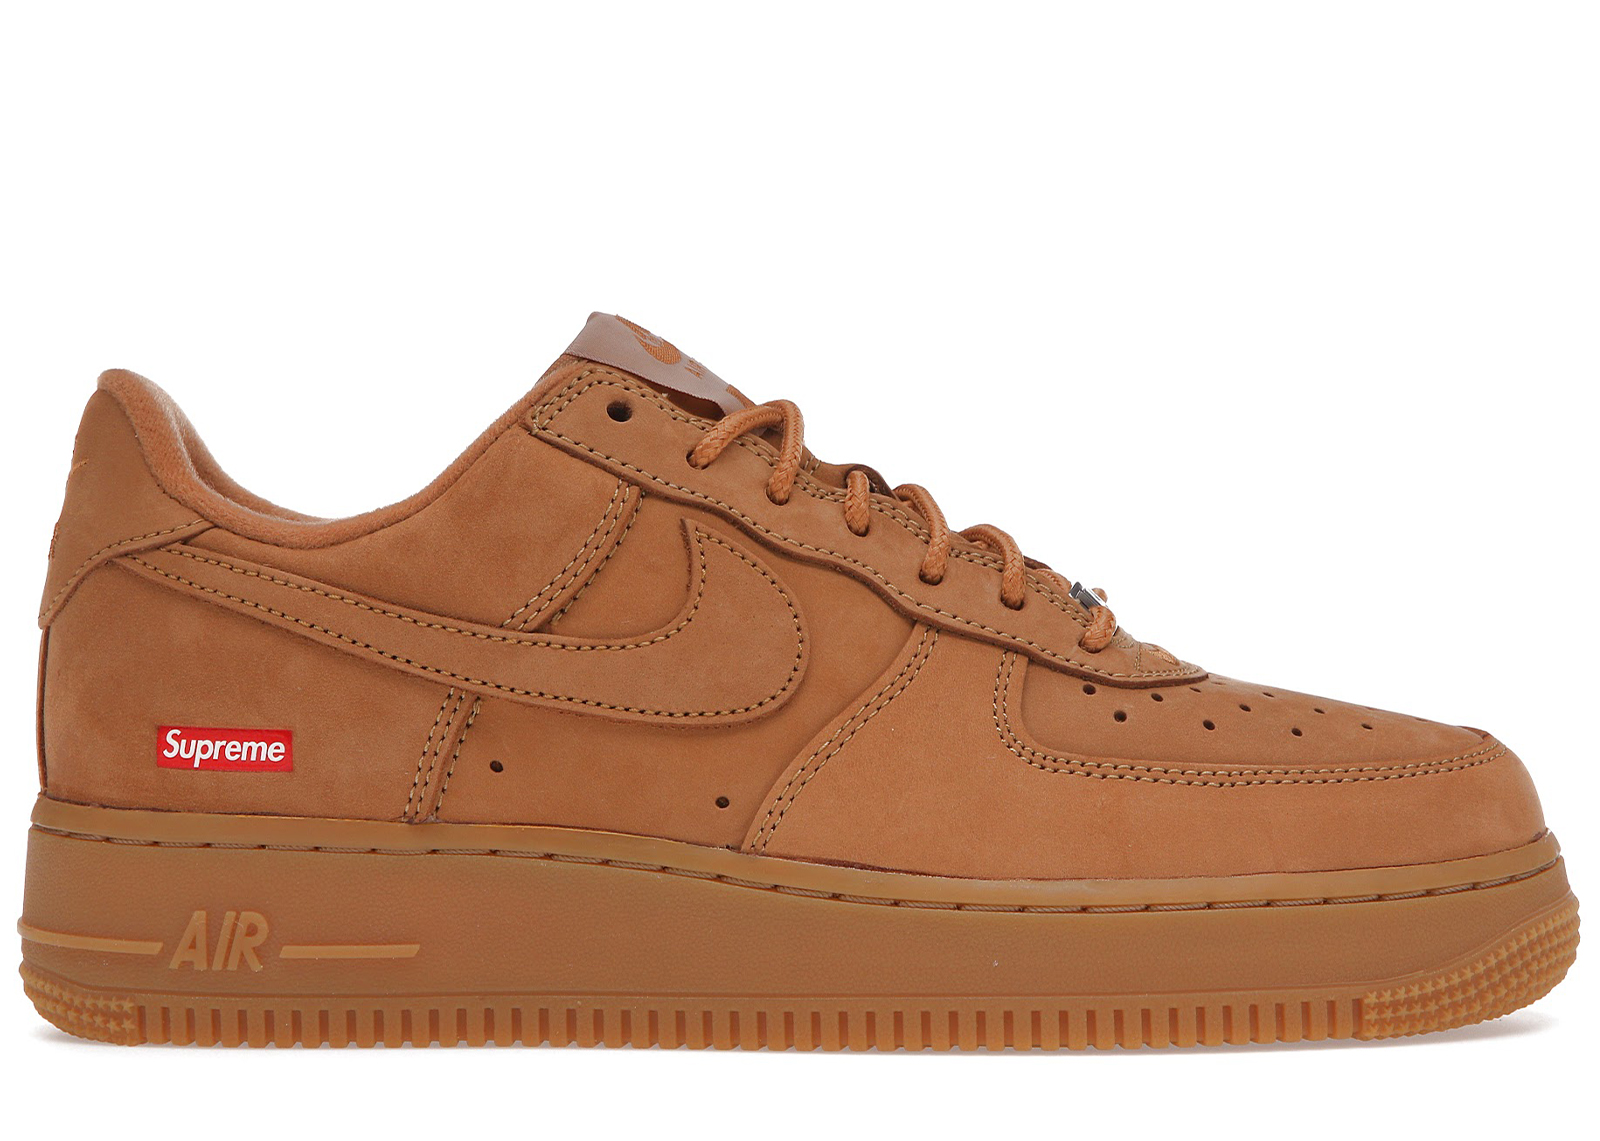 Nike Air Force 1 Low SP Supreme Wheat - DN1555-200 - US